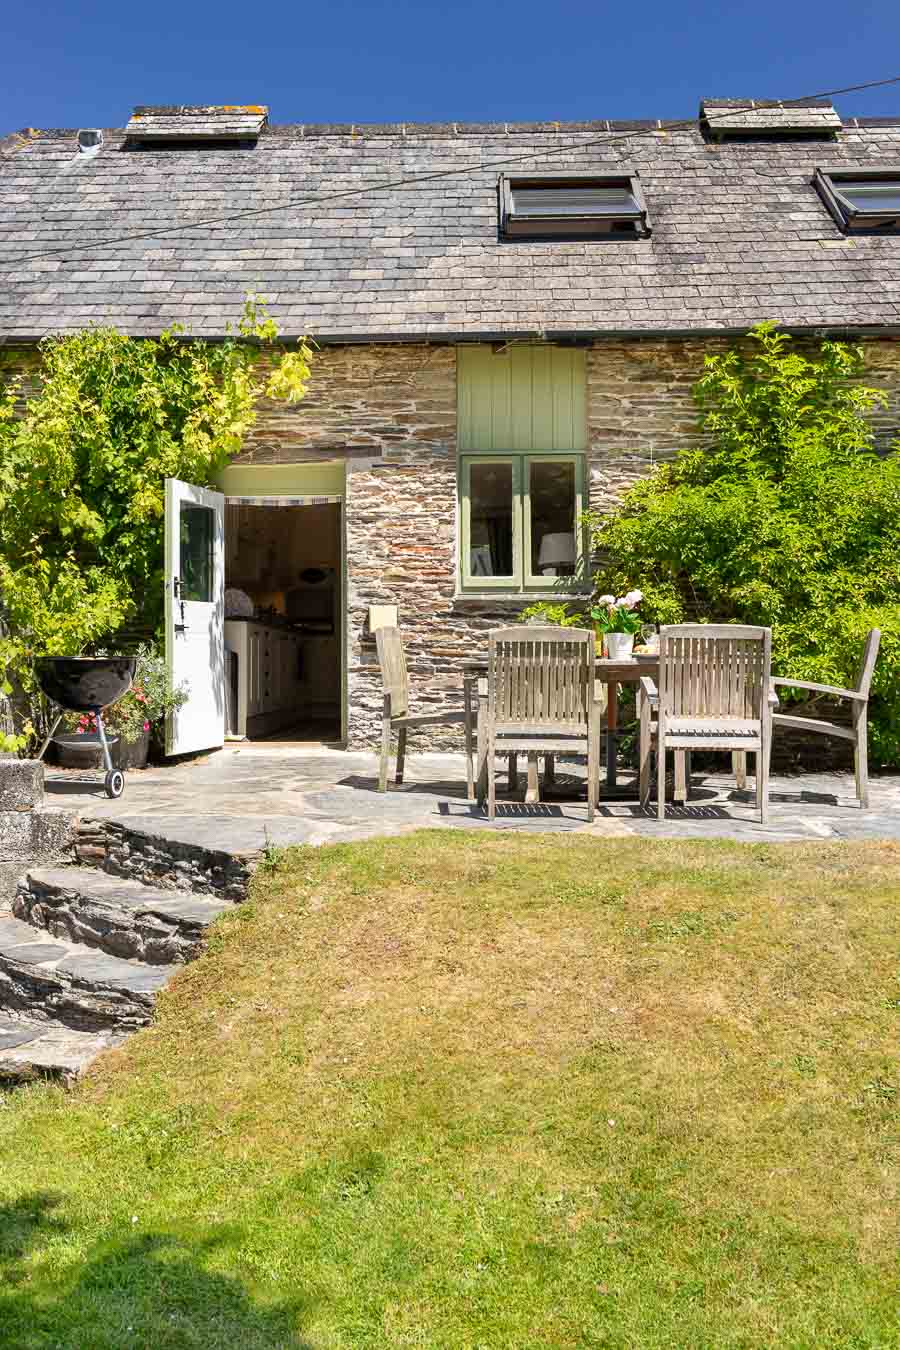 The Stables is a family holiday cottage set amongst 12 well-appointed holiday cottages with wonderful facilities for all ages (and all weathers!)